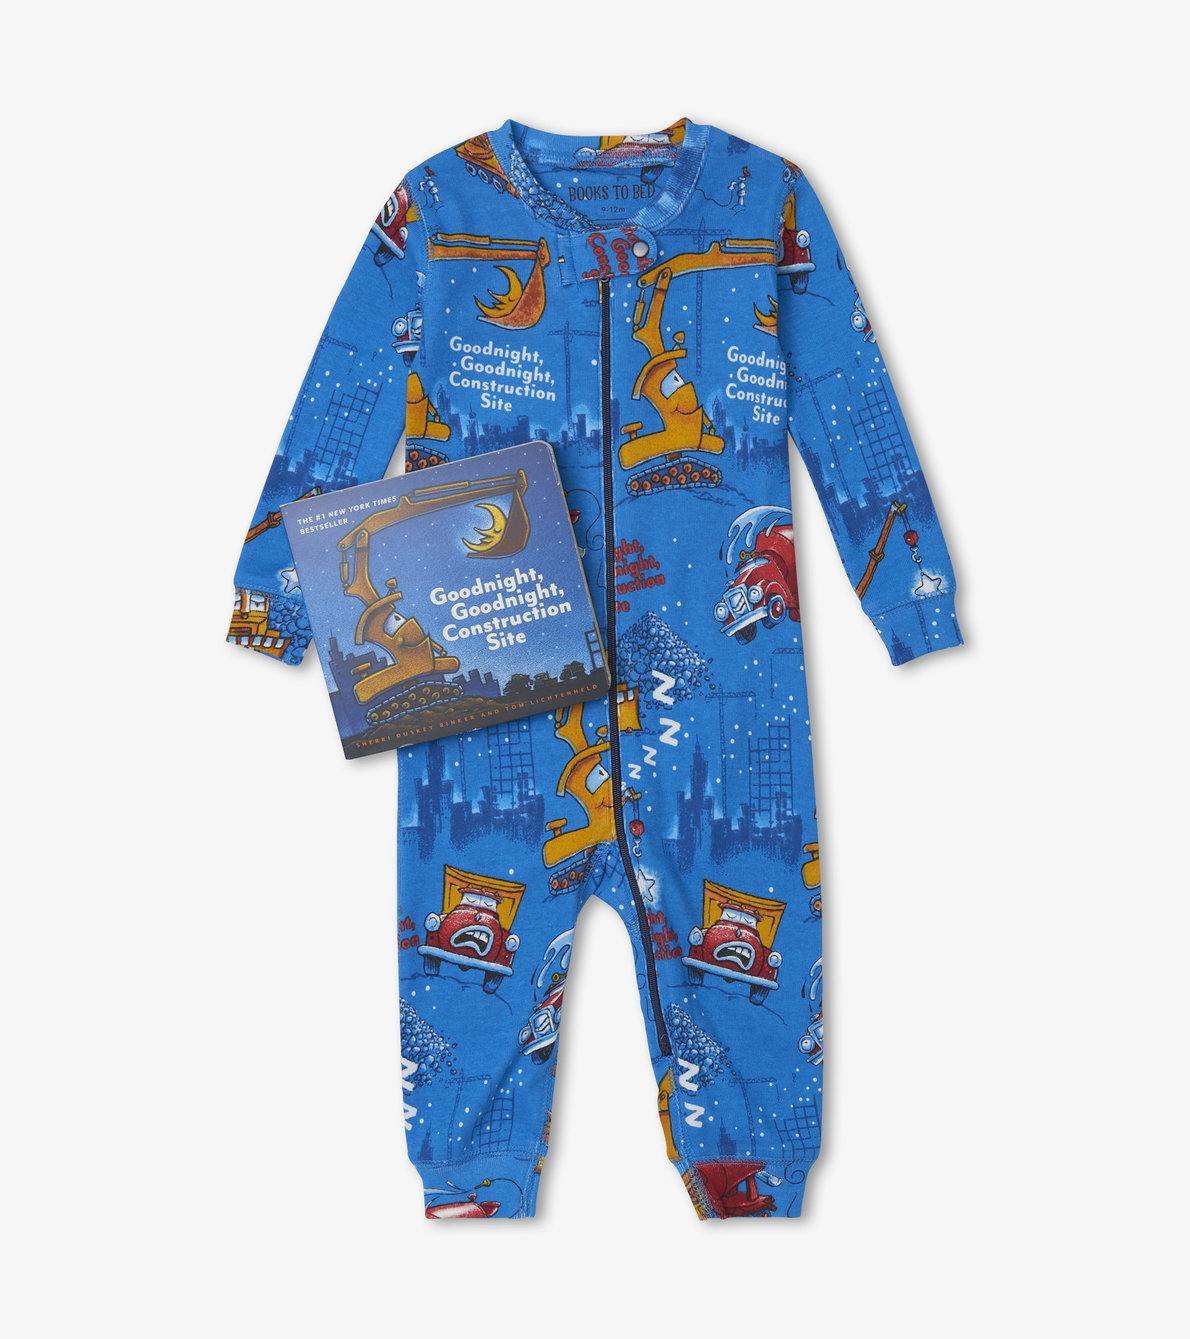 View larger image of Good Night Construction Site Book and Infant Coverall